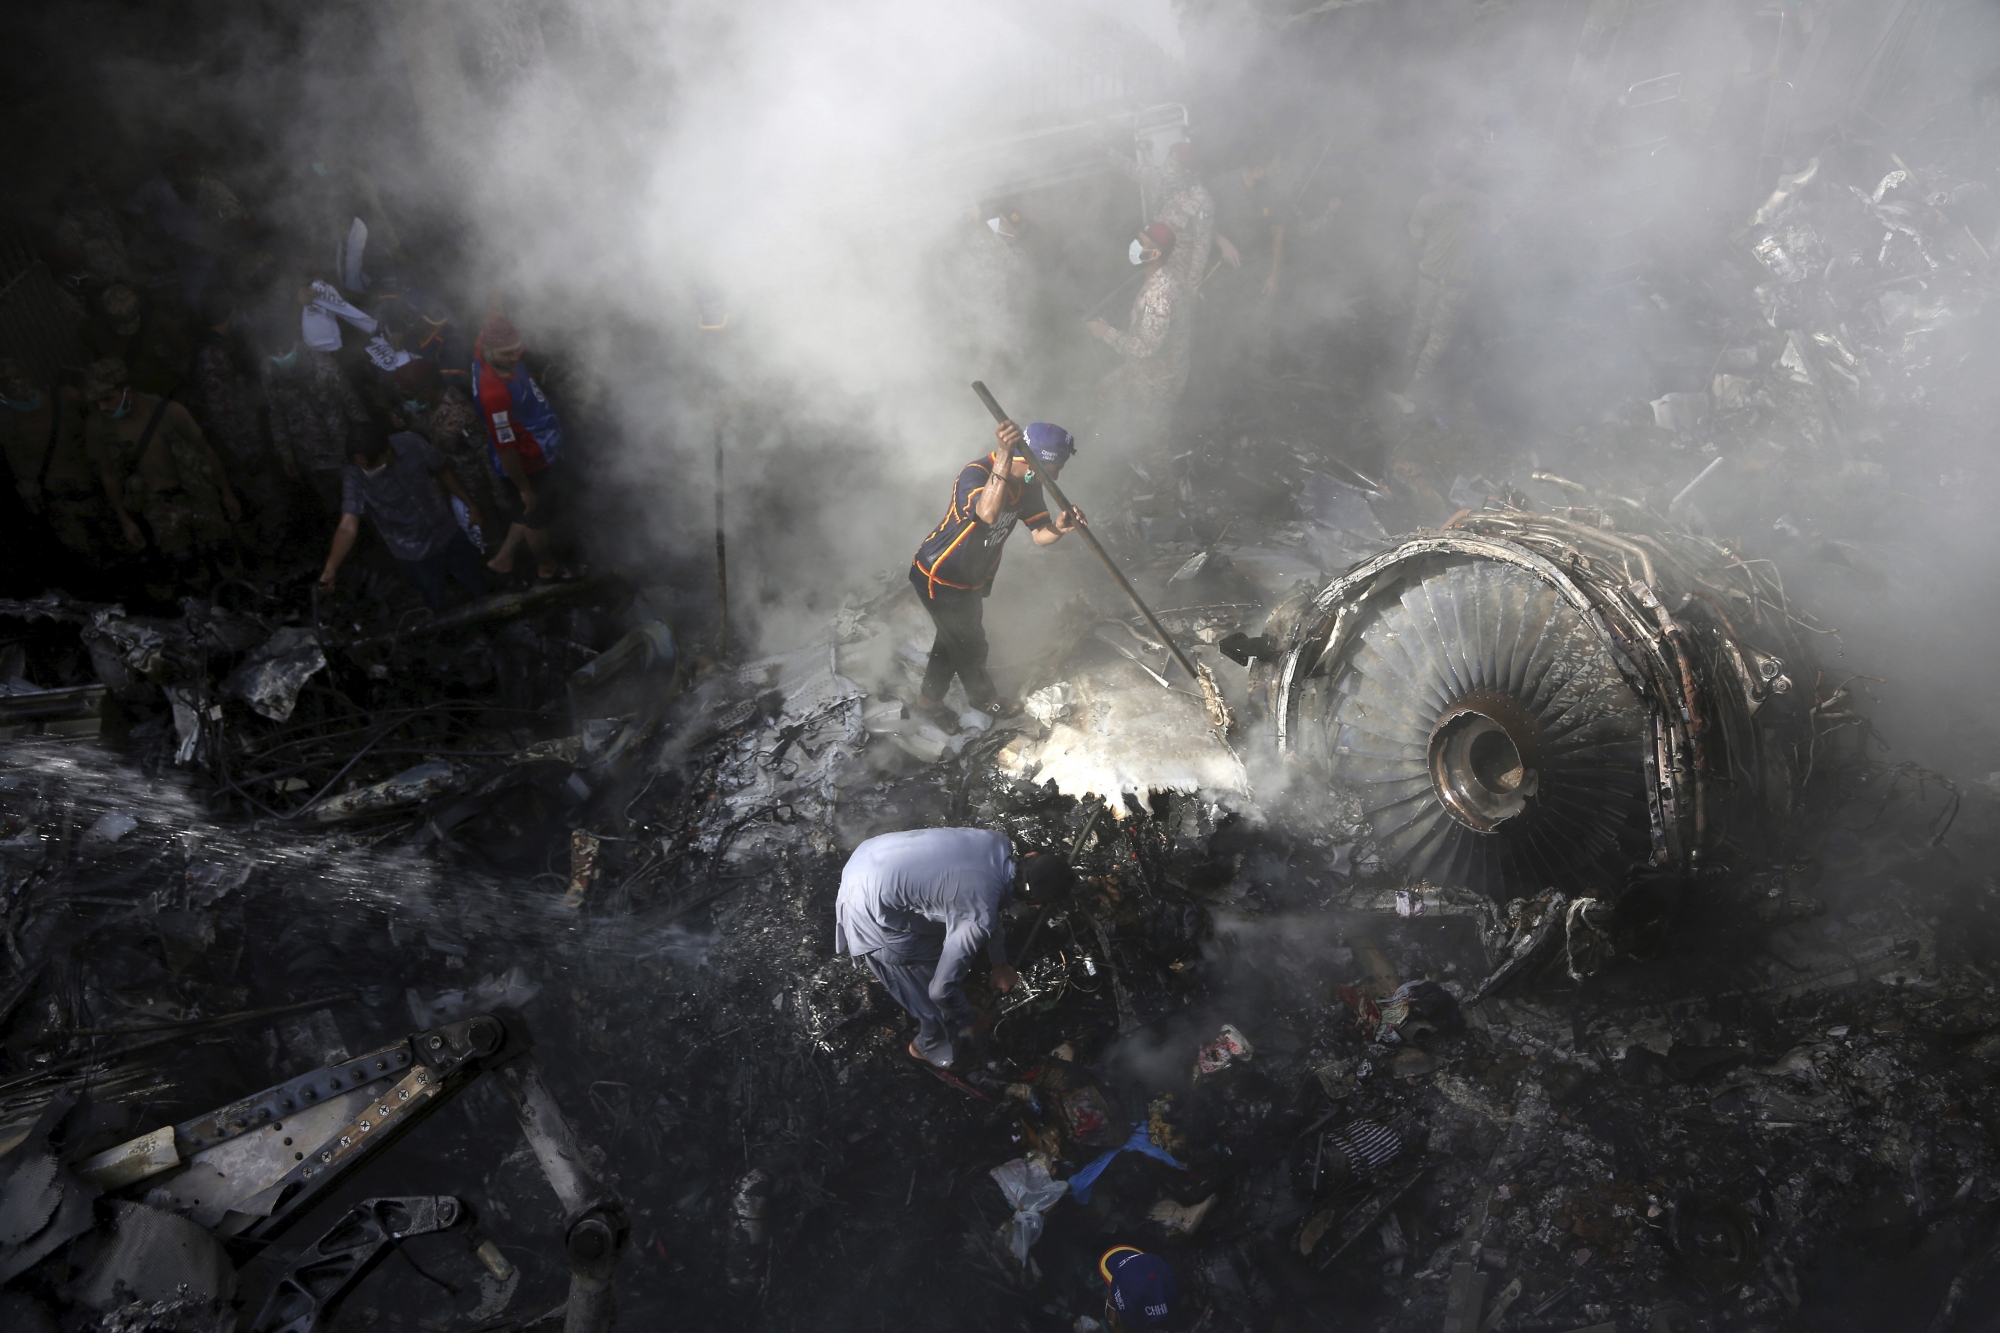 Volunteers look for survivors of a plane that crashed in residential area of Karachi, Pakistan, May 22, 2020. An aviation official says a passenger plane belonging to state-run Pakistan International Airlines carrying more than 100 passengers and crew has crashed near the southern port city of Karachi. (AP Photo/Fareed Khan) Pakistan Plane Crash